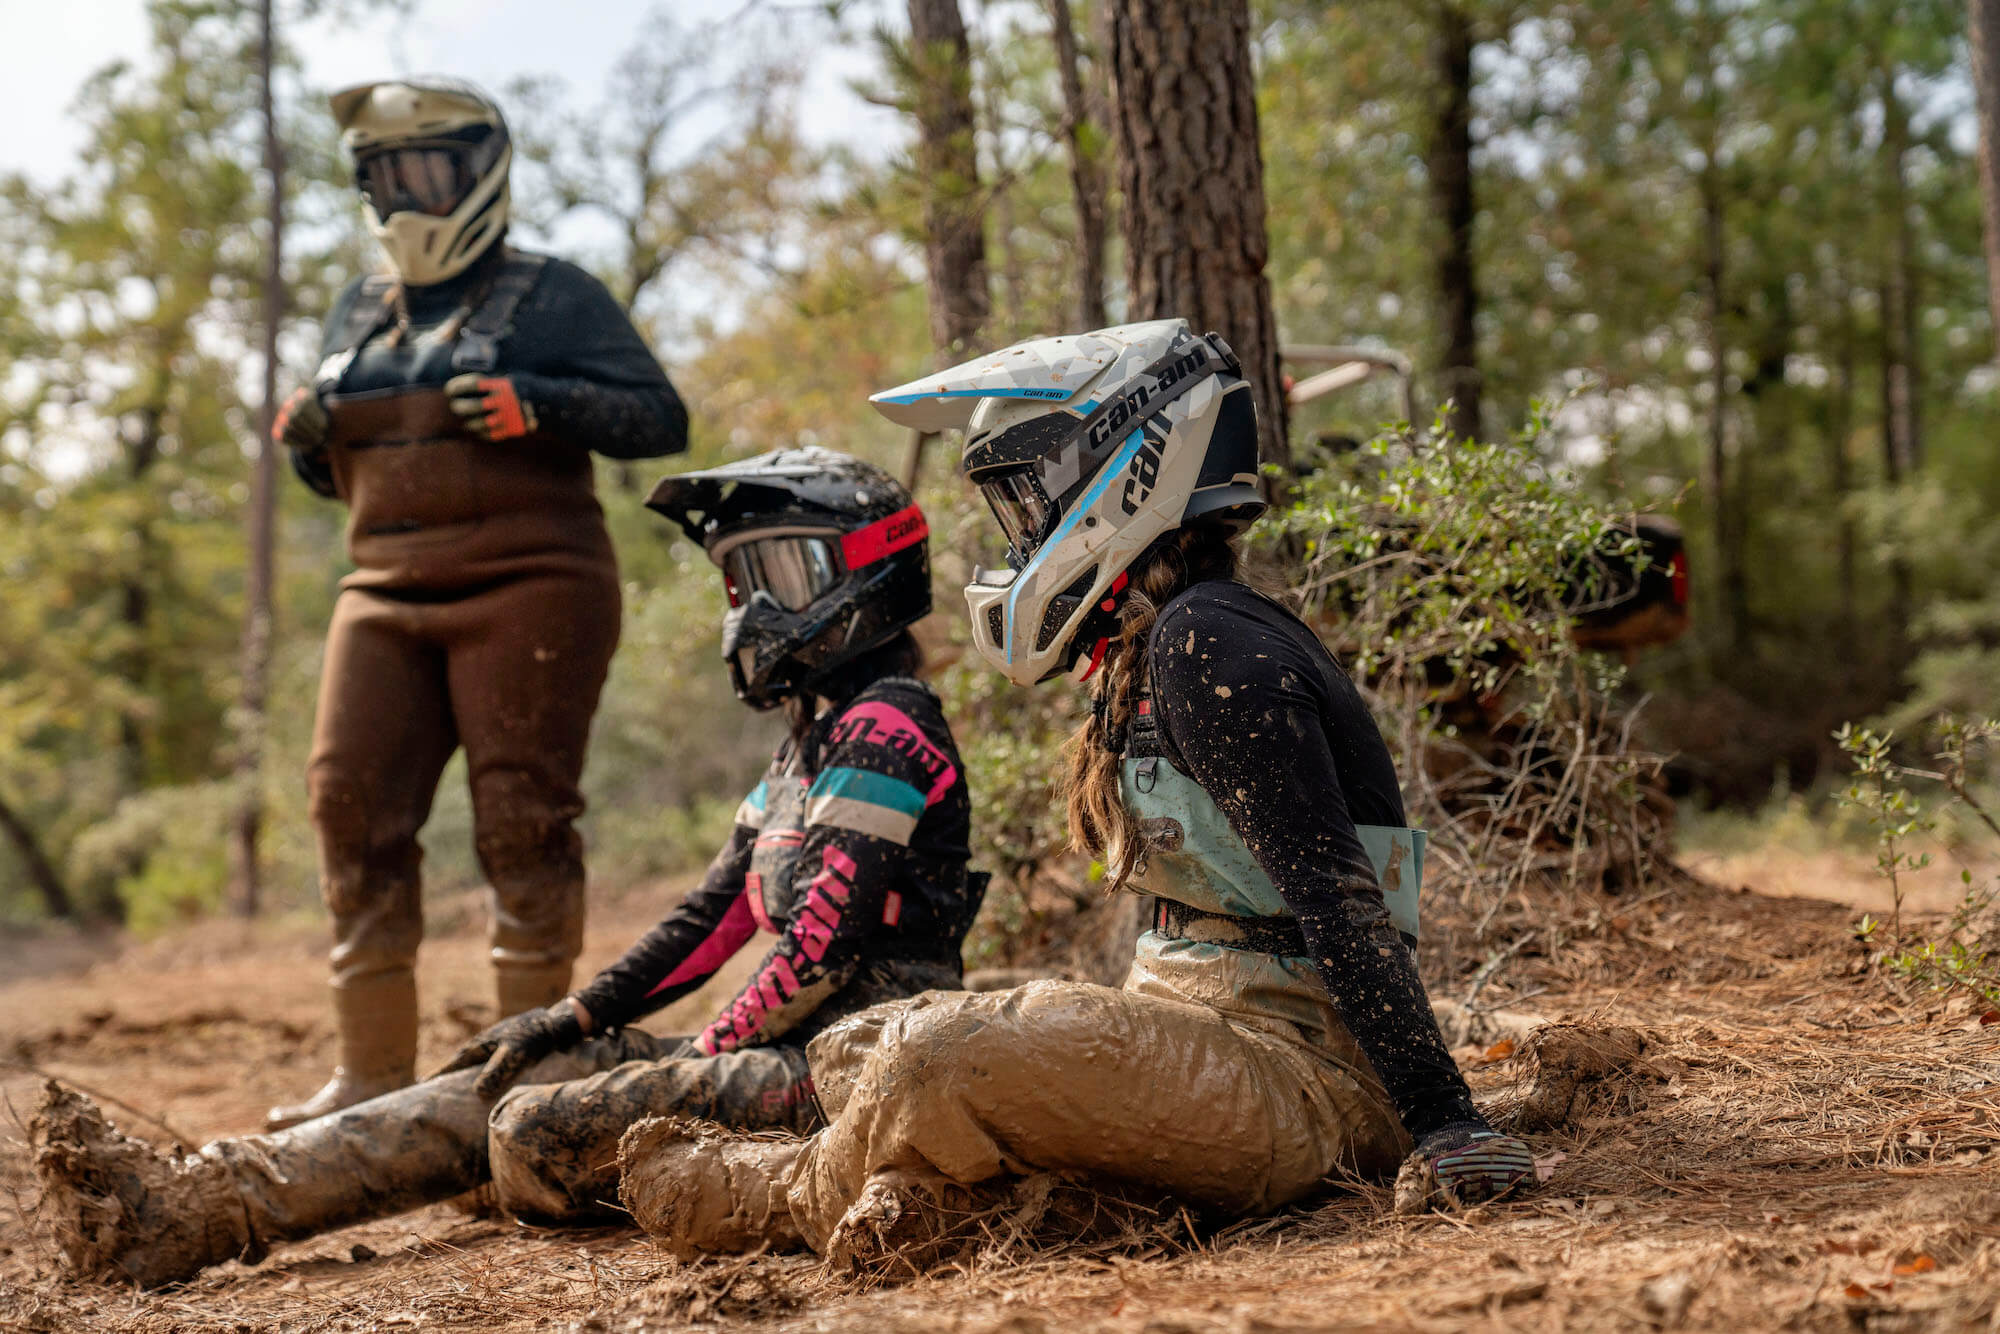 Enbridge – Promoting powersports safety as a ‘learned behavior.’